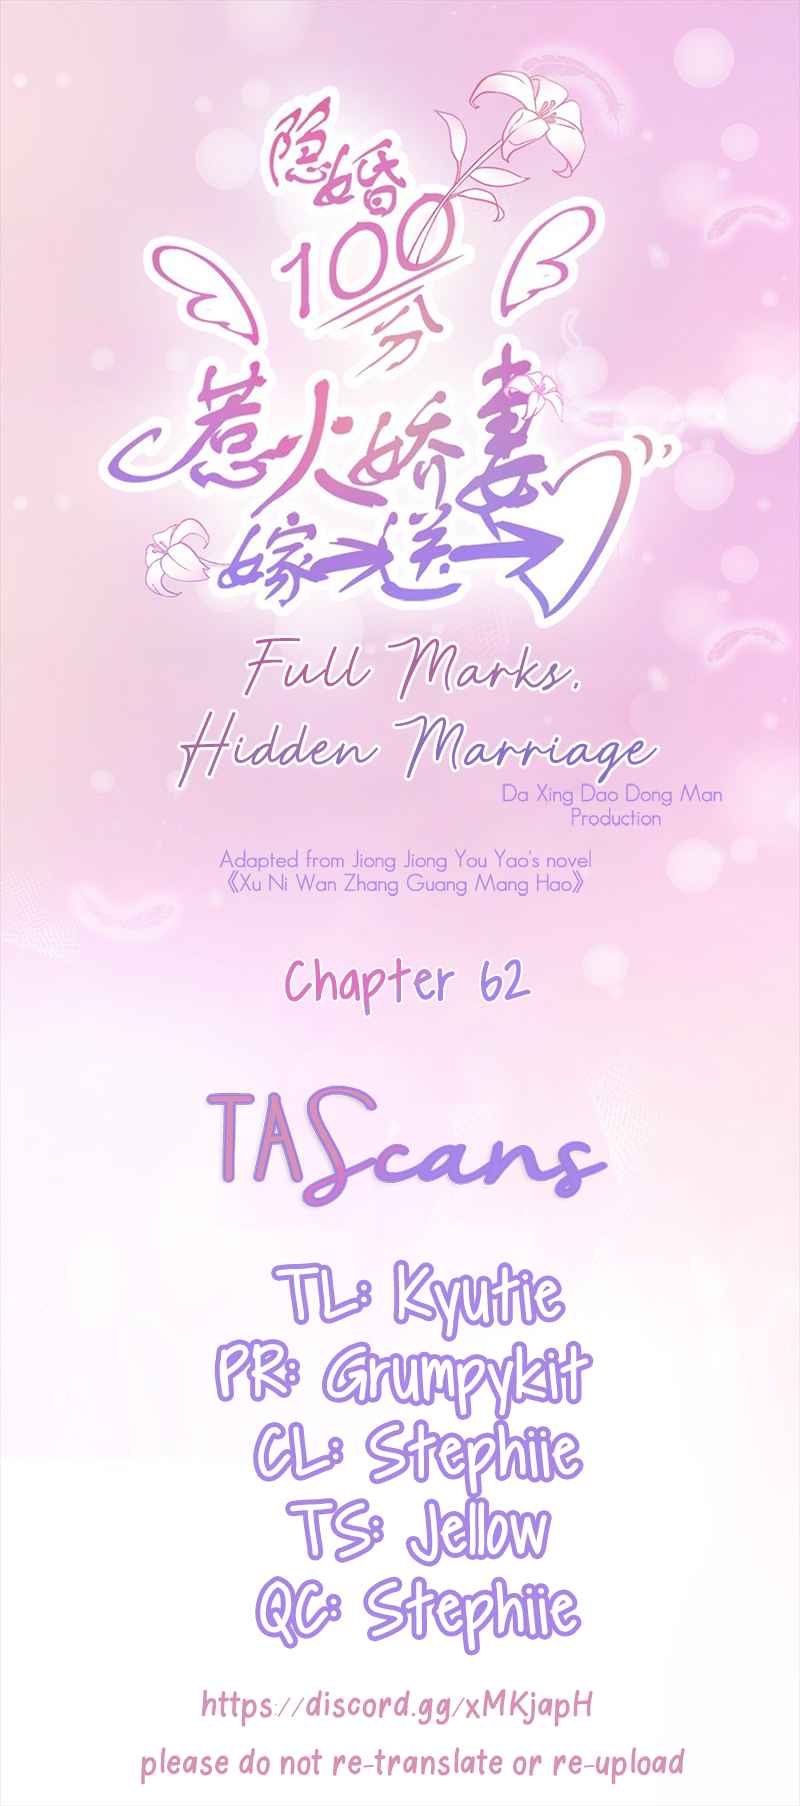 Full Marks, Hidden Marriage Ch. 62 Bro, did you take the wrong script?